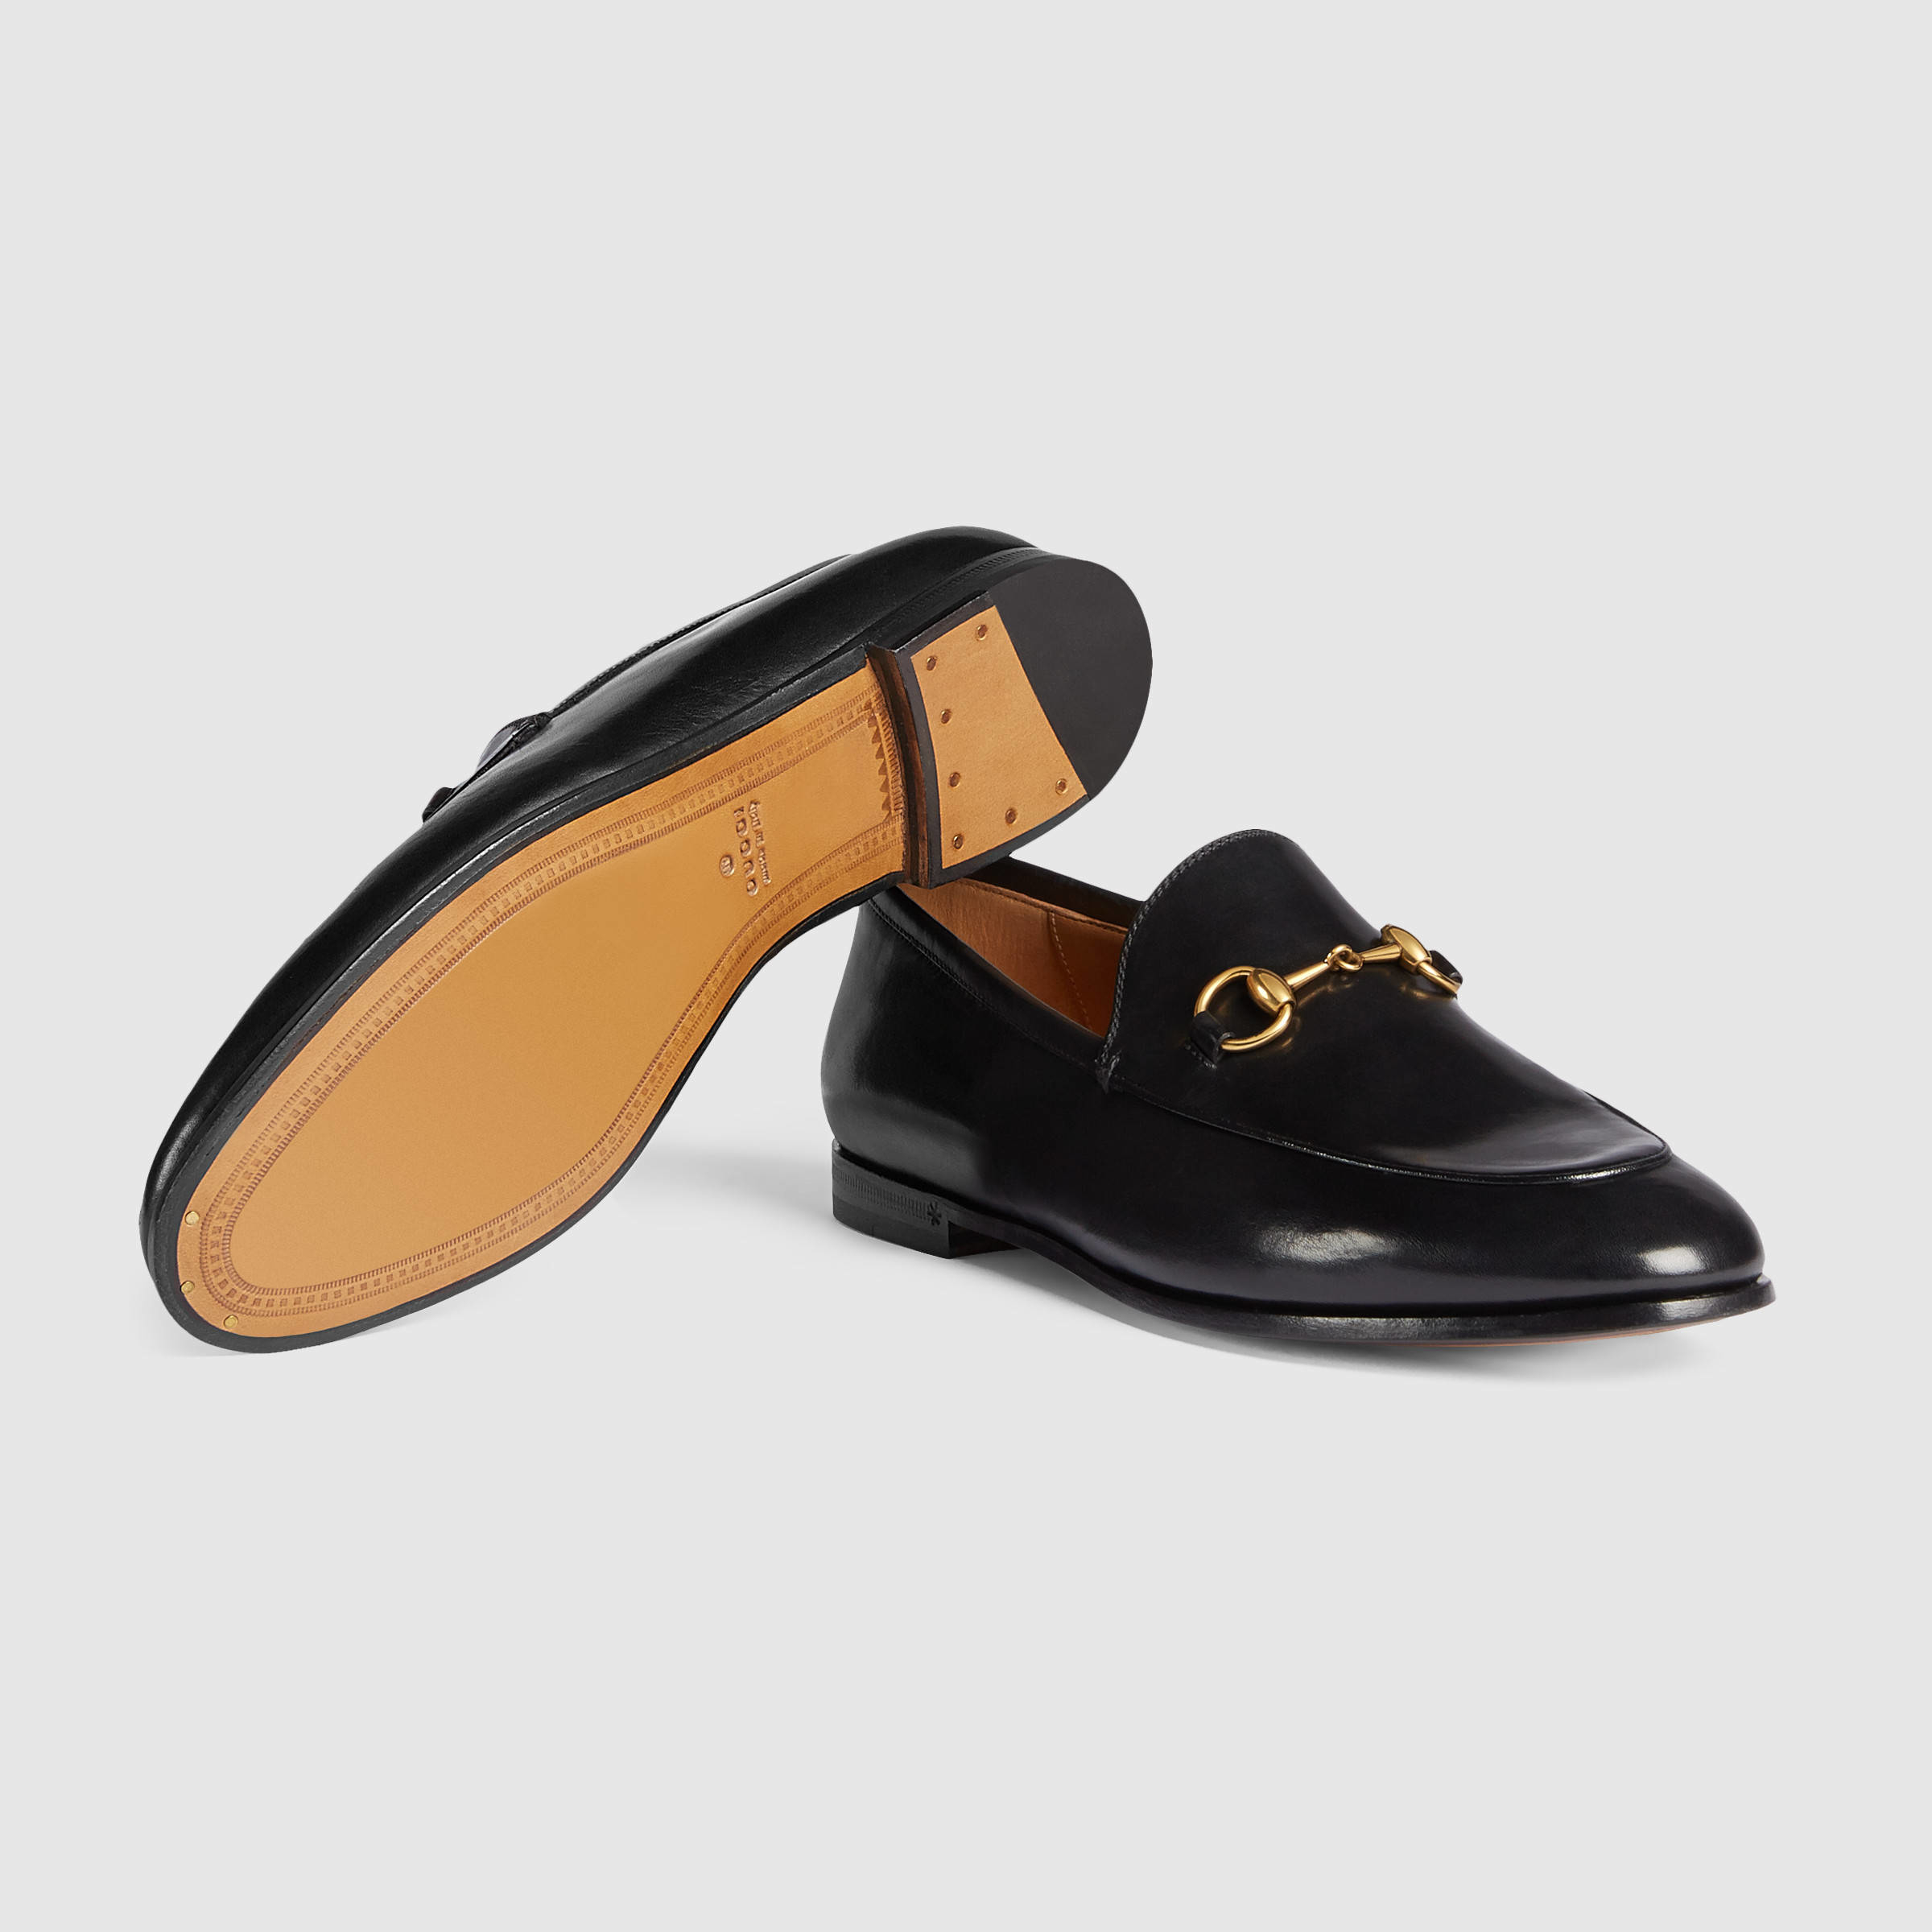 Lyst - Gucci Jordaan Leather Loafers in Black